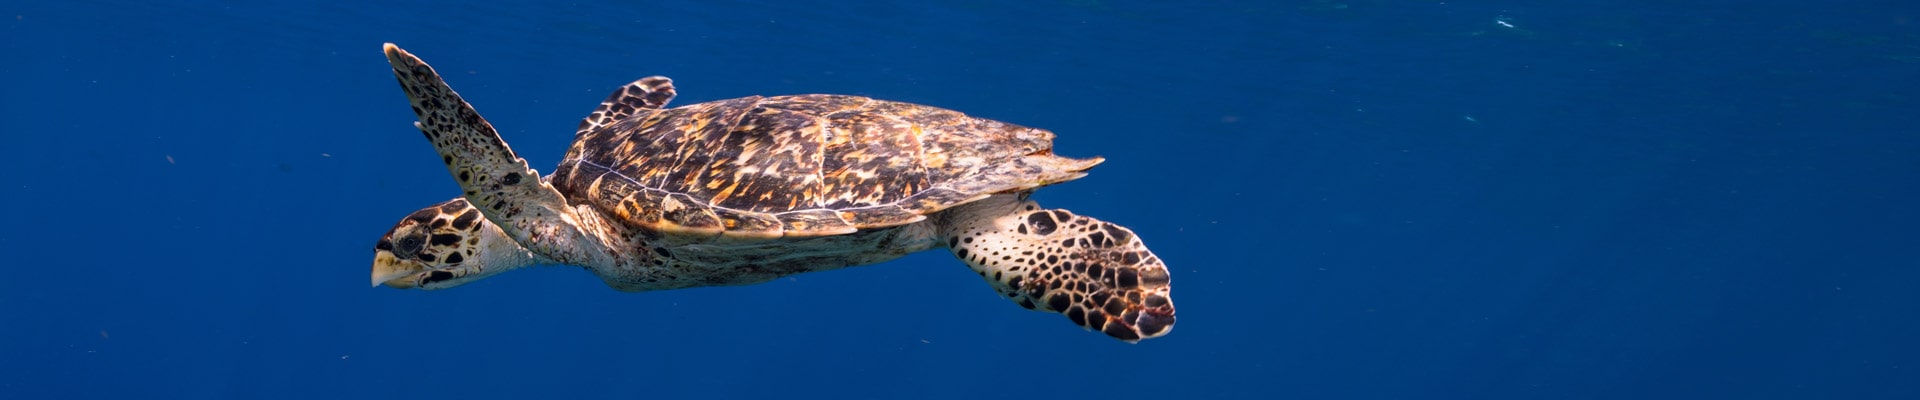 Banner image featuring sea turtle